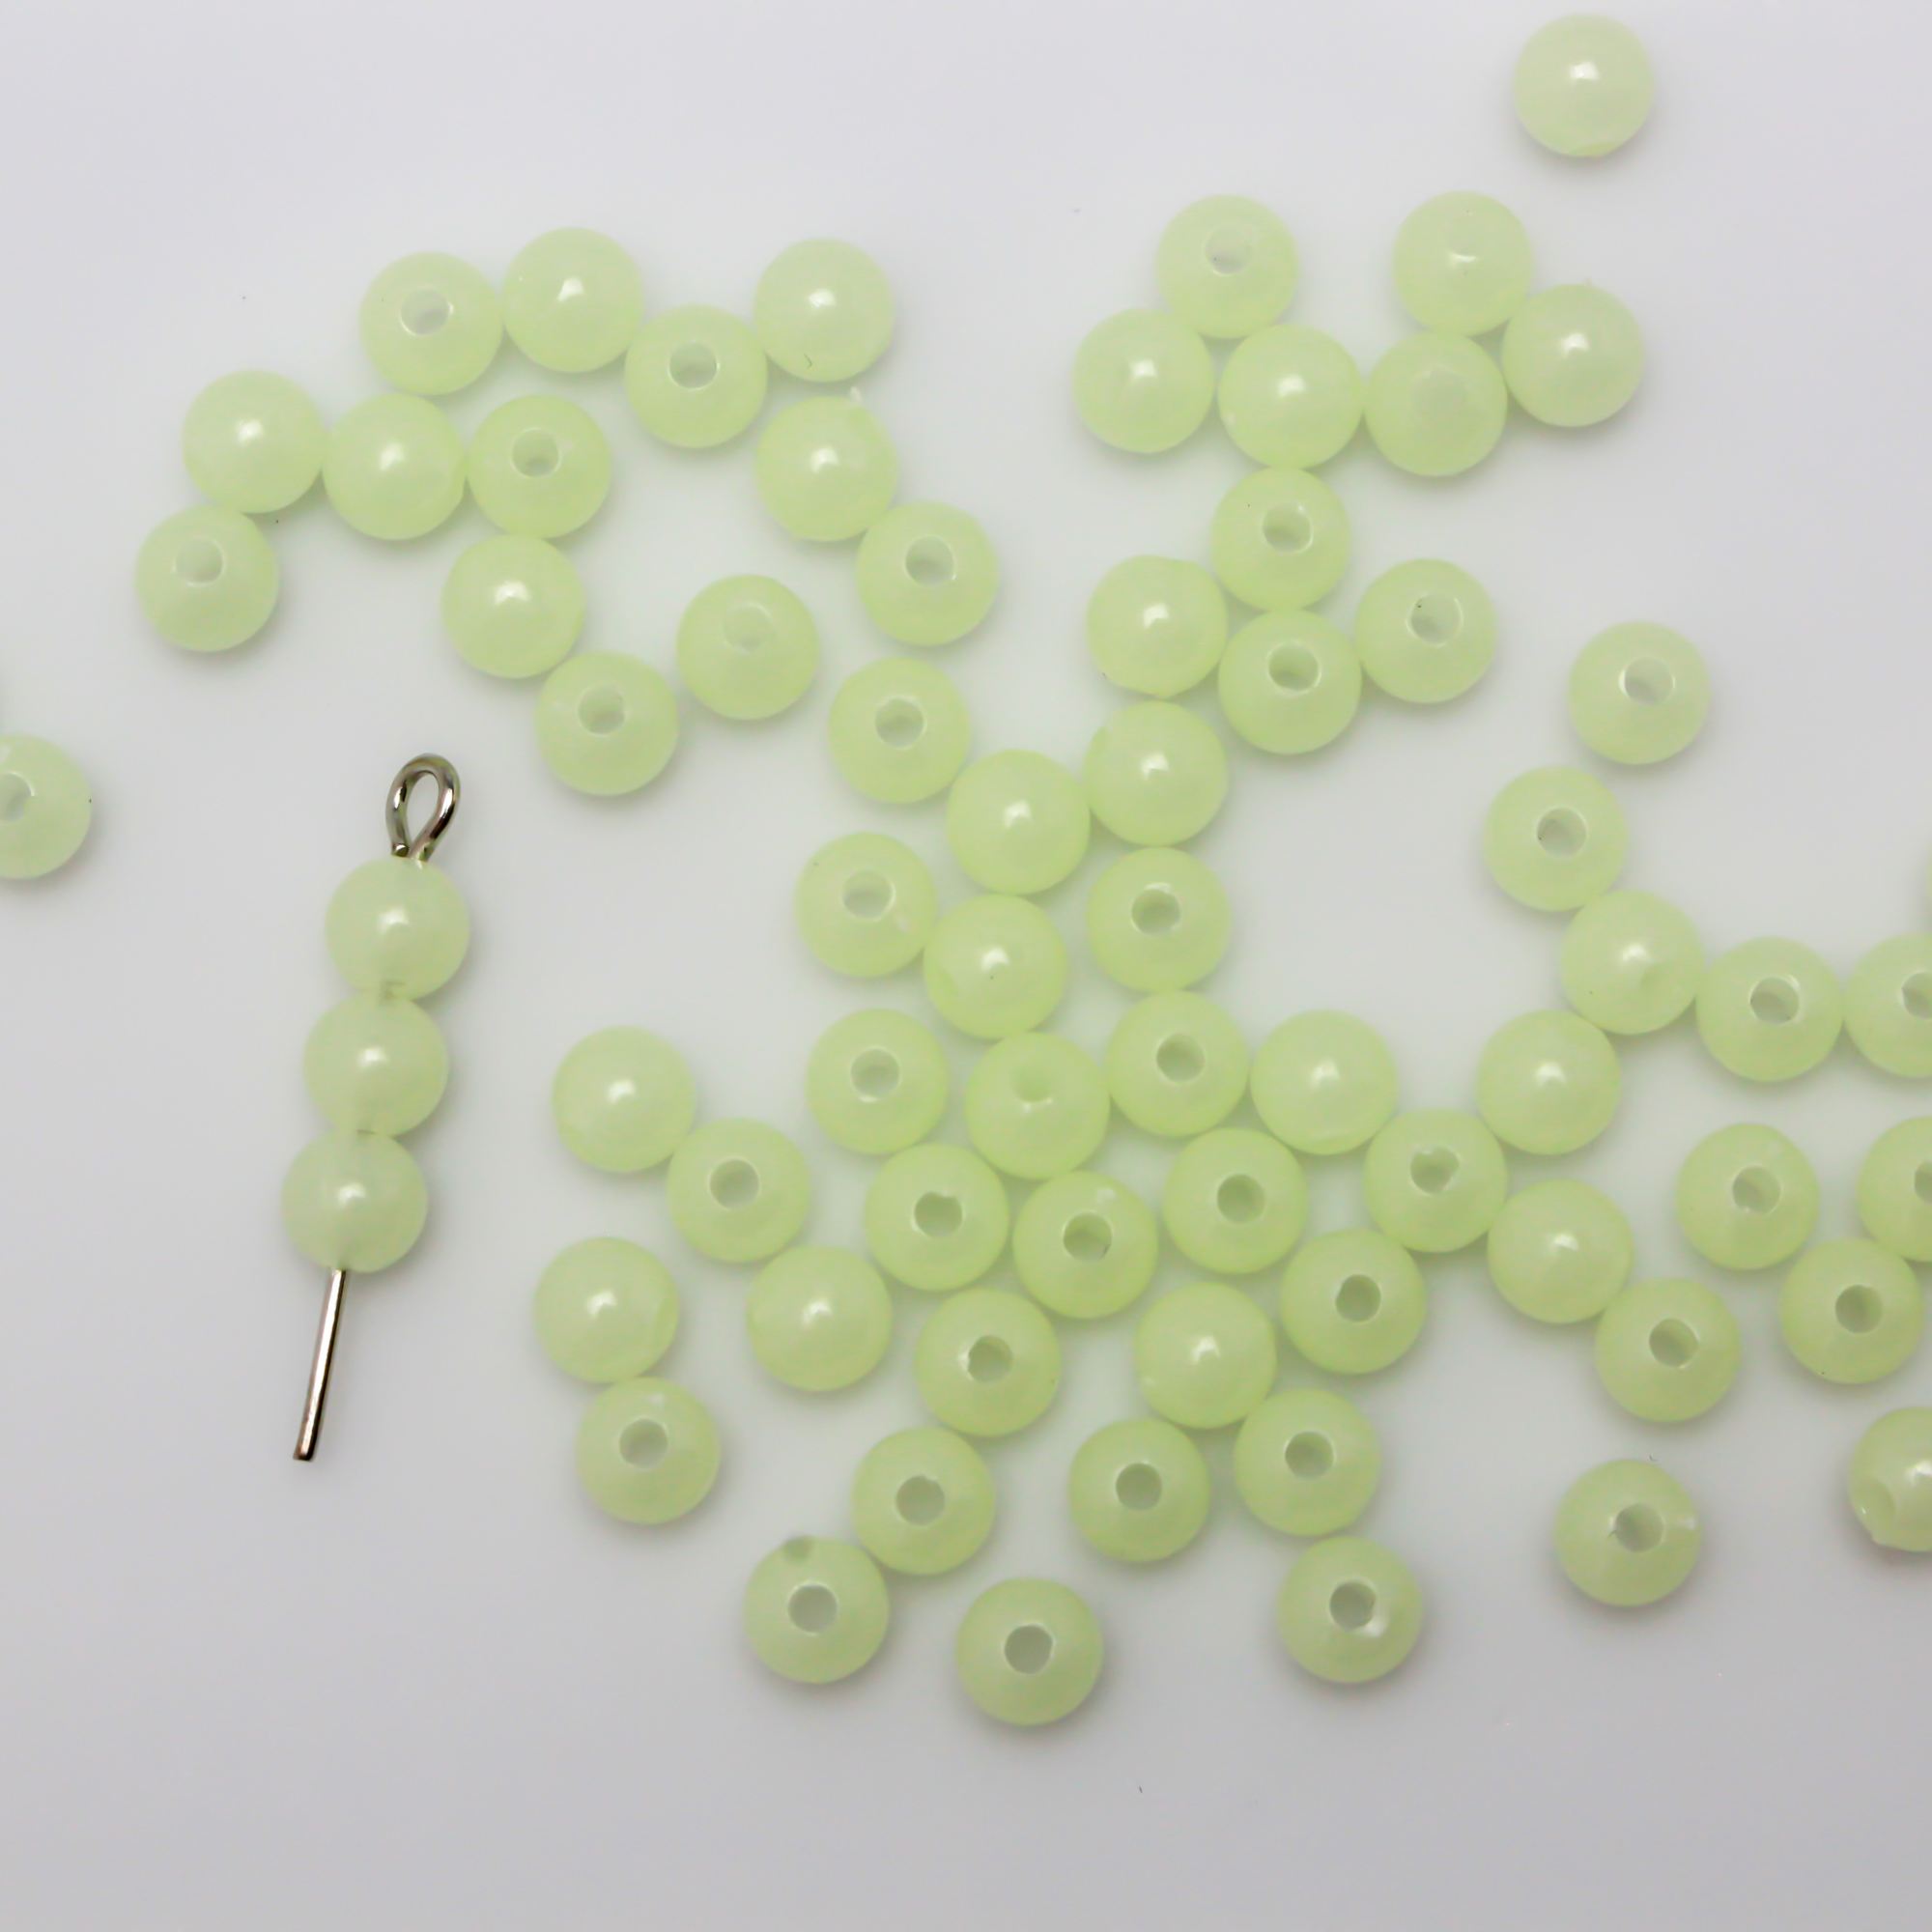 Luminous glow in the dark acrylic beads that are center drilled. They are a light pale green color when viewed in daylight. They glow green in the dark